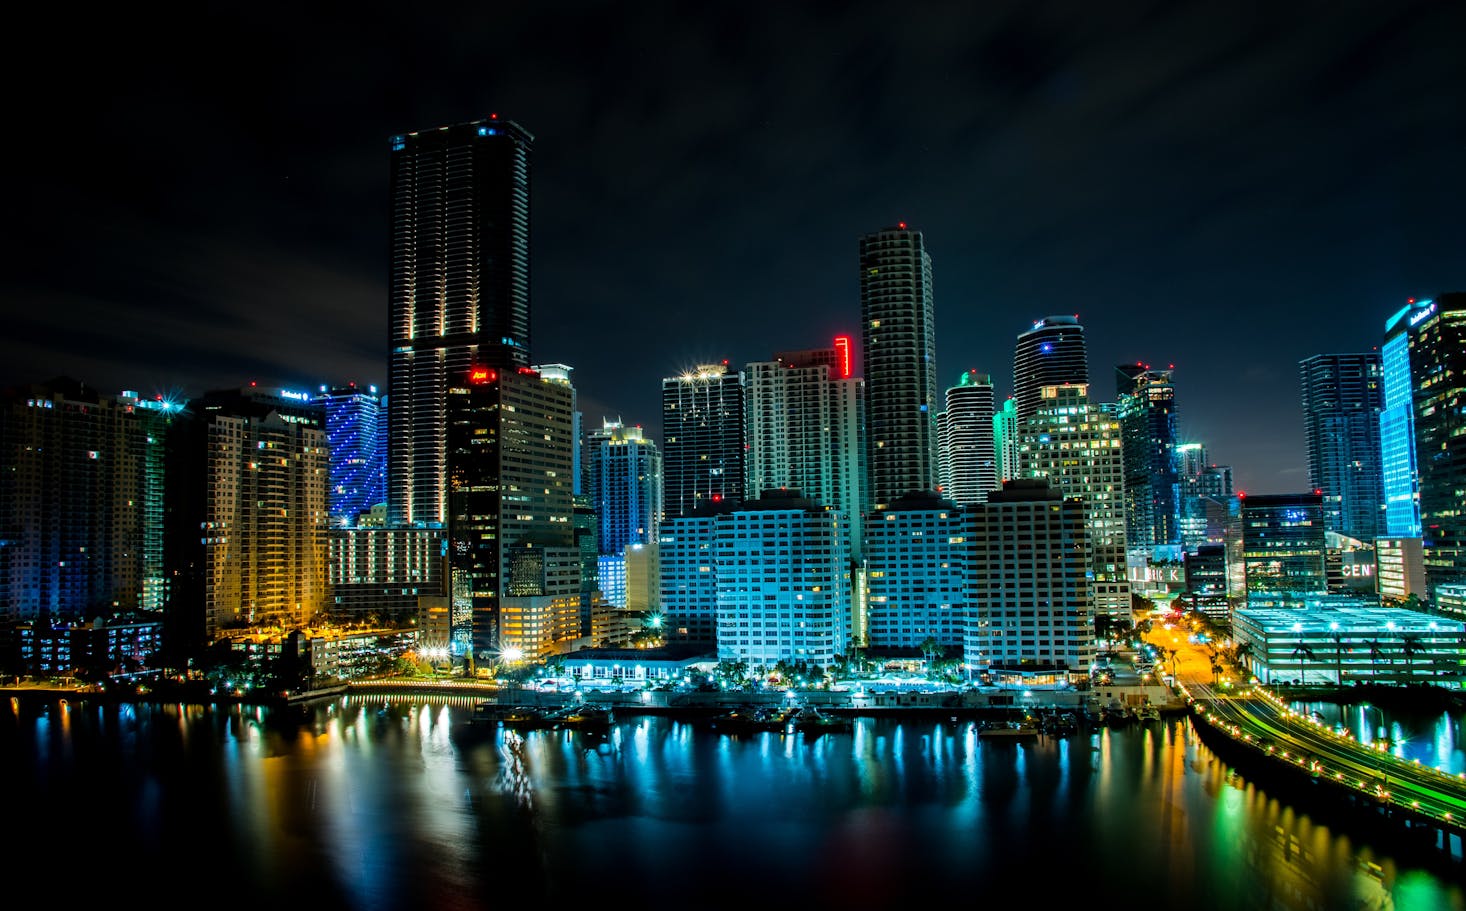 The best time to visit Miami, FL